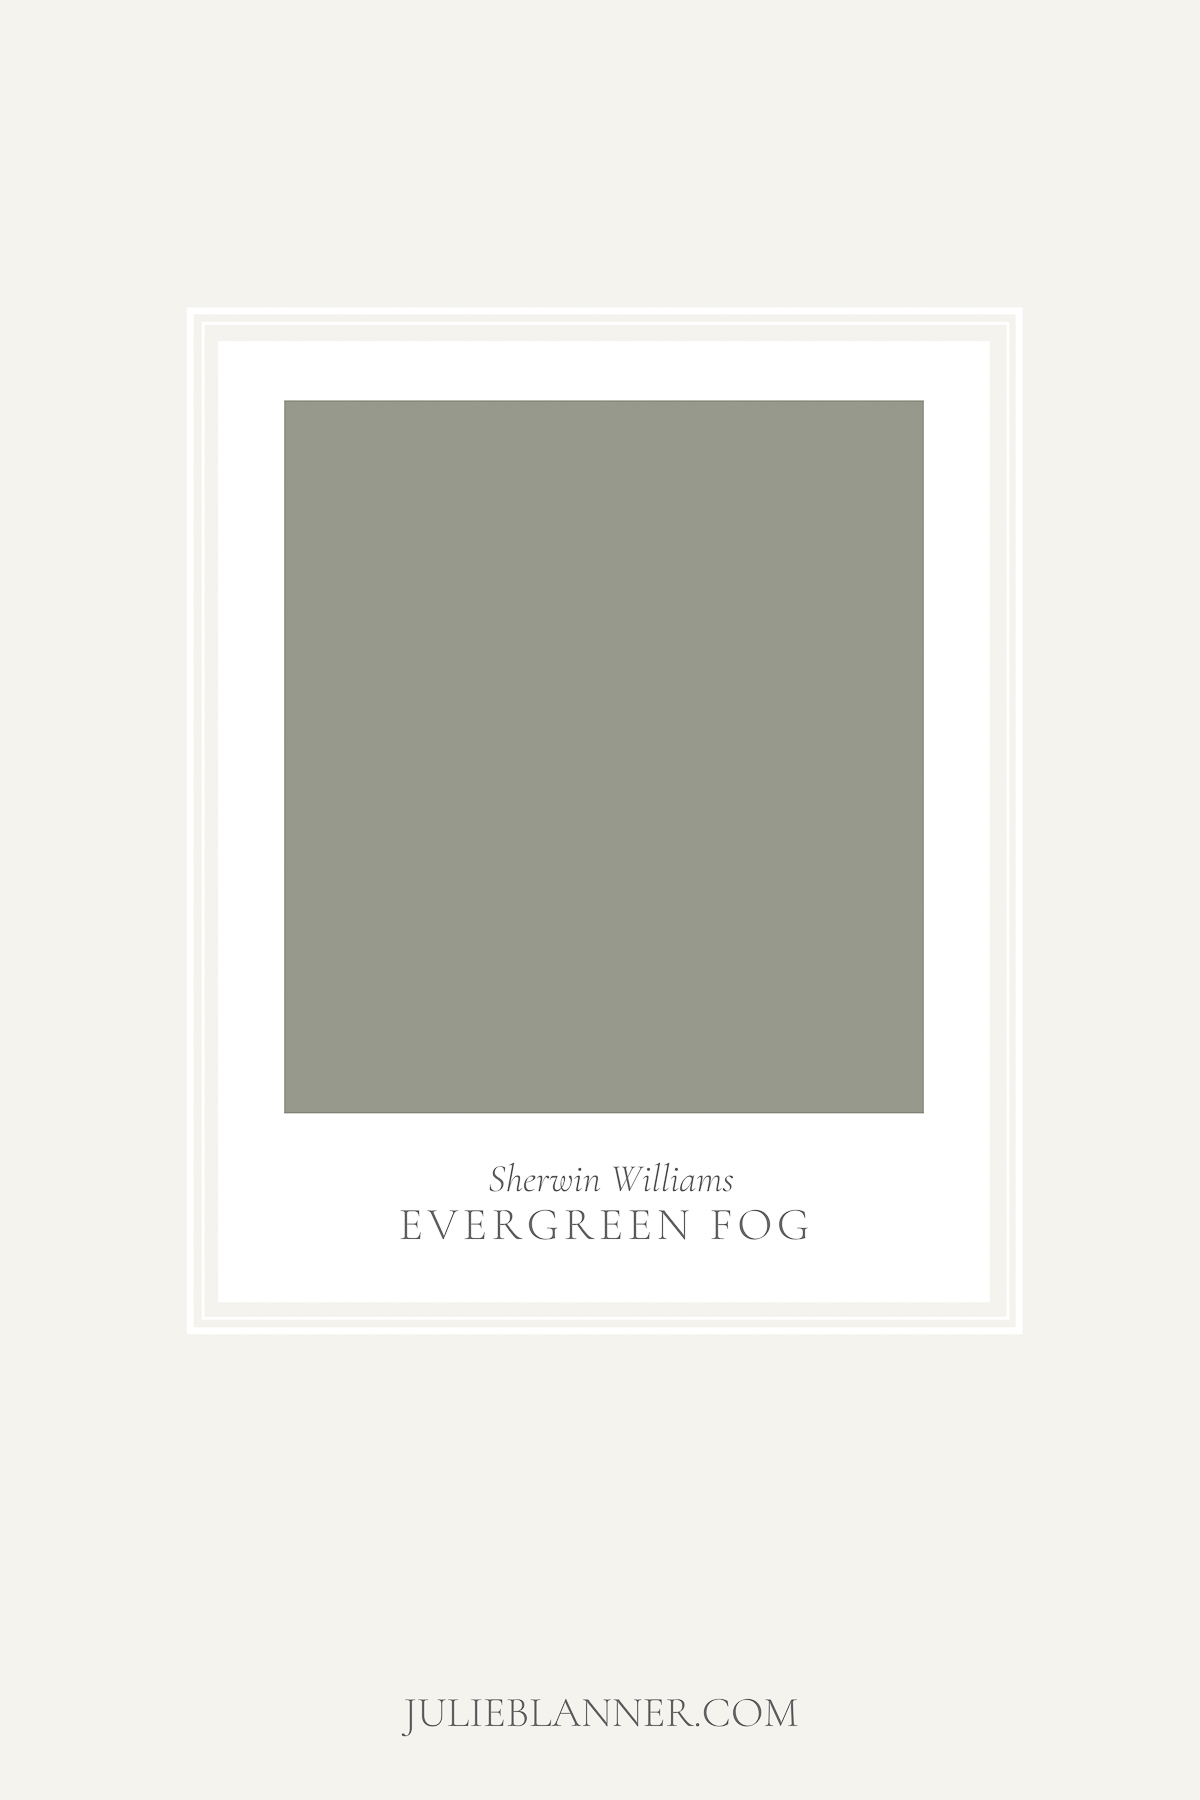 A graphic featuring a paint card for Sherwin Williams Evergreen Fog, a deck paint color.